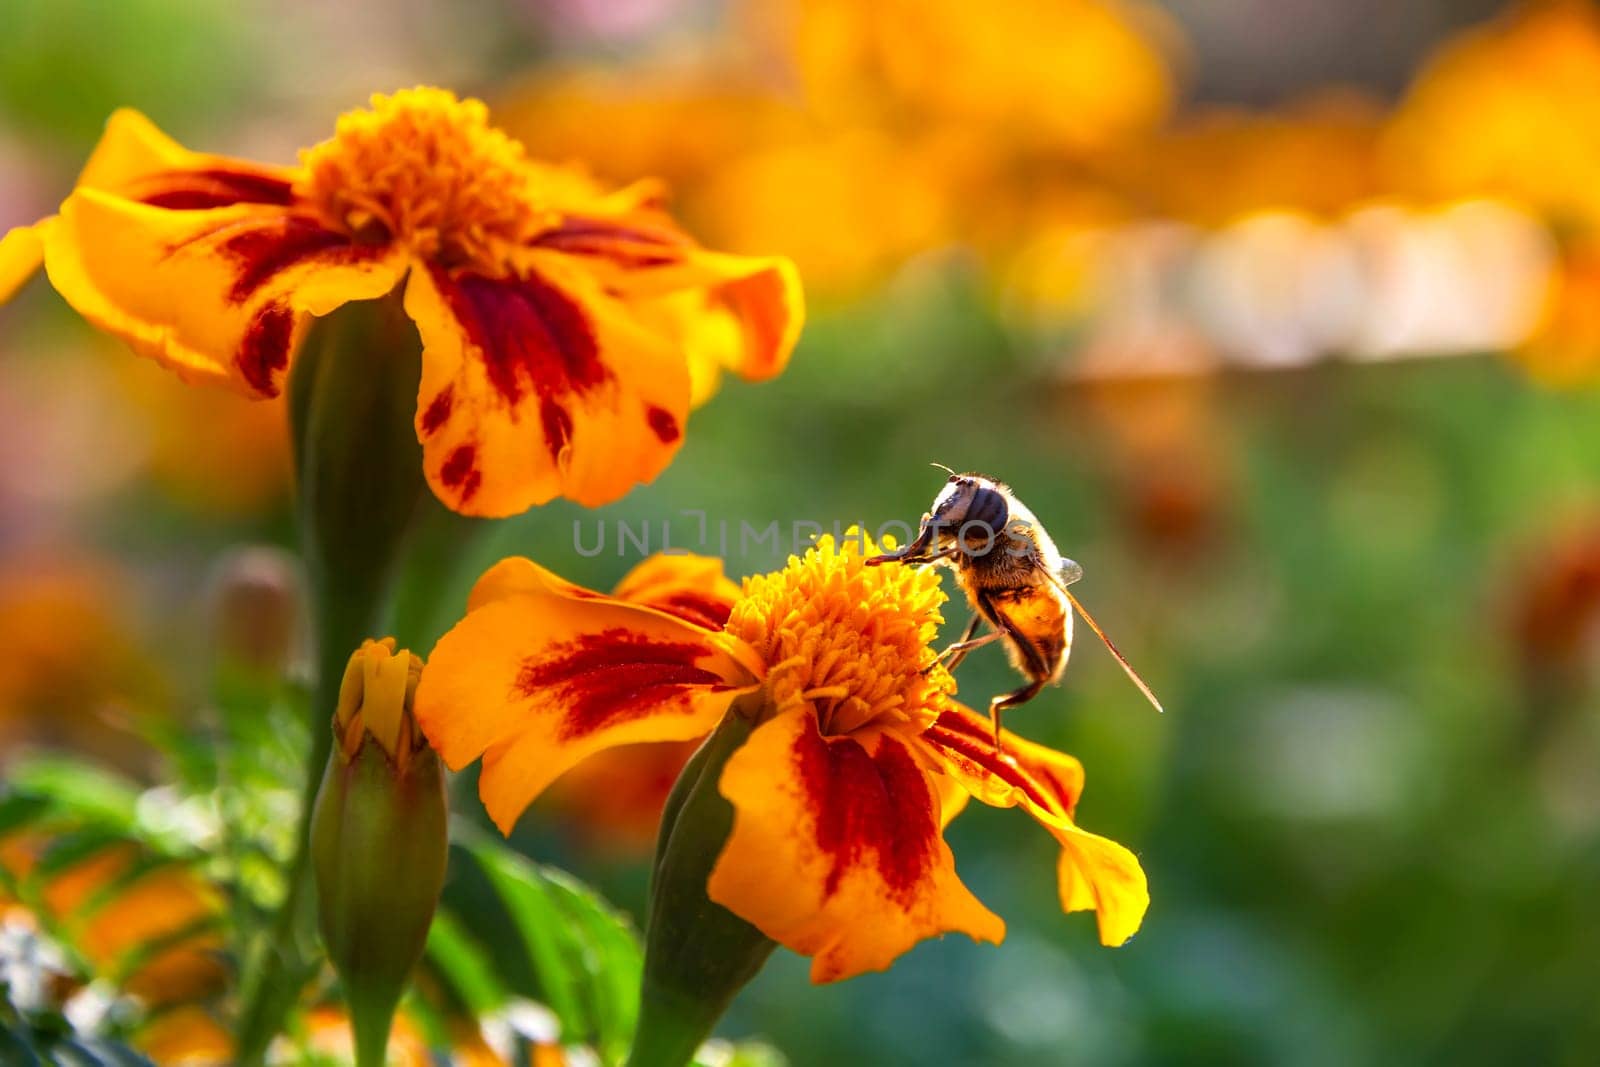 Close up of a bee on a colorful Marigold flower or Tagetes erecta.